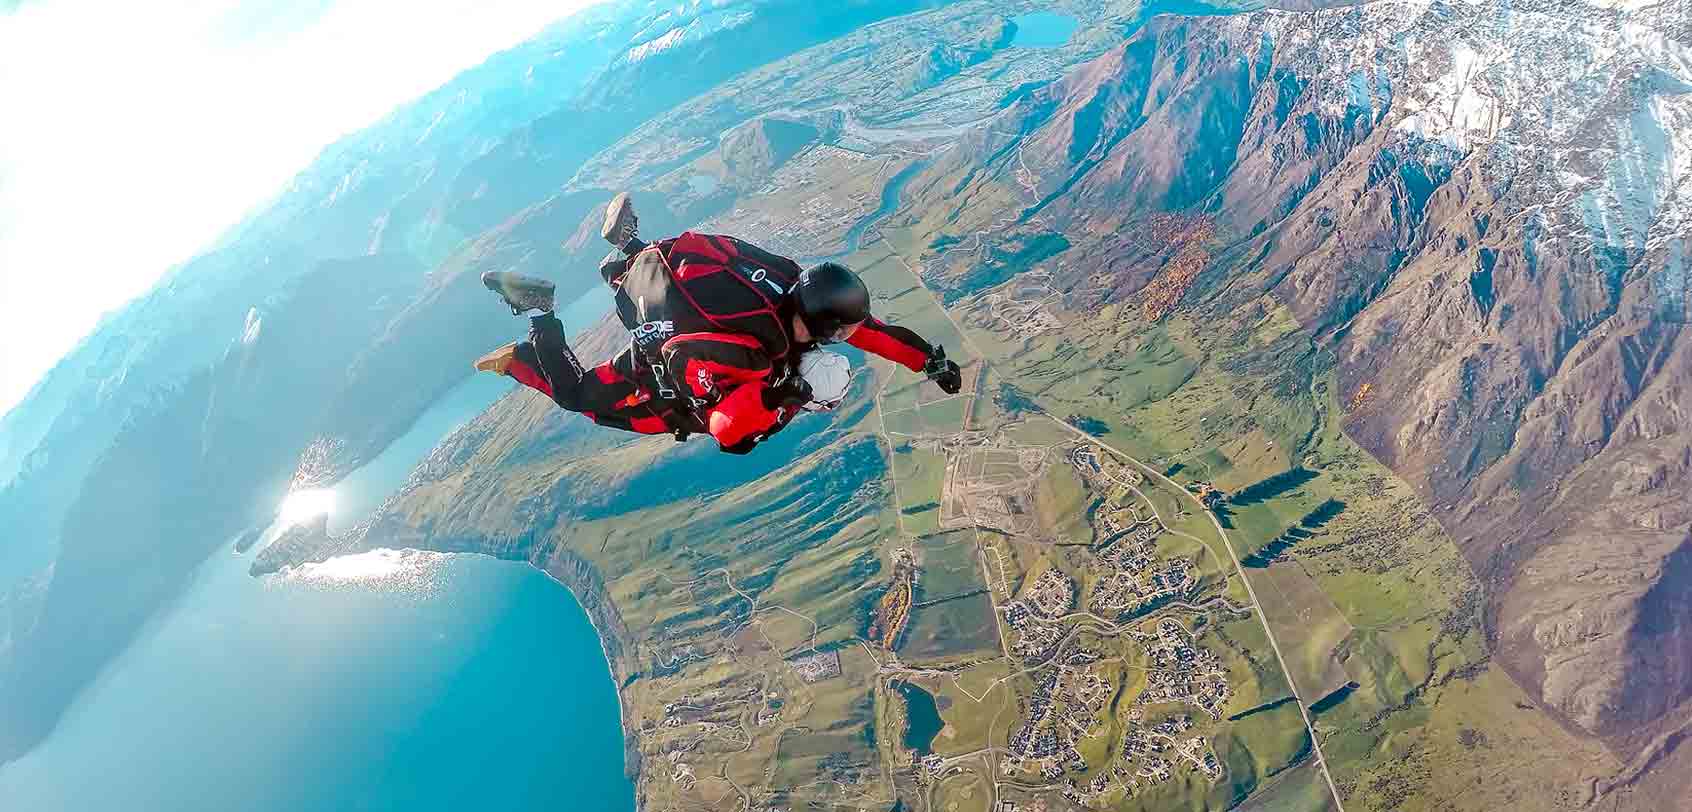 Things to Do in North Island : Sky diving